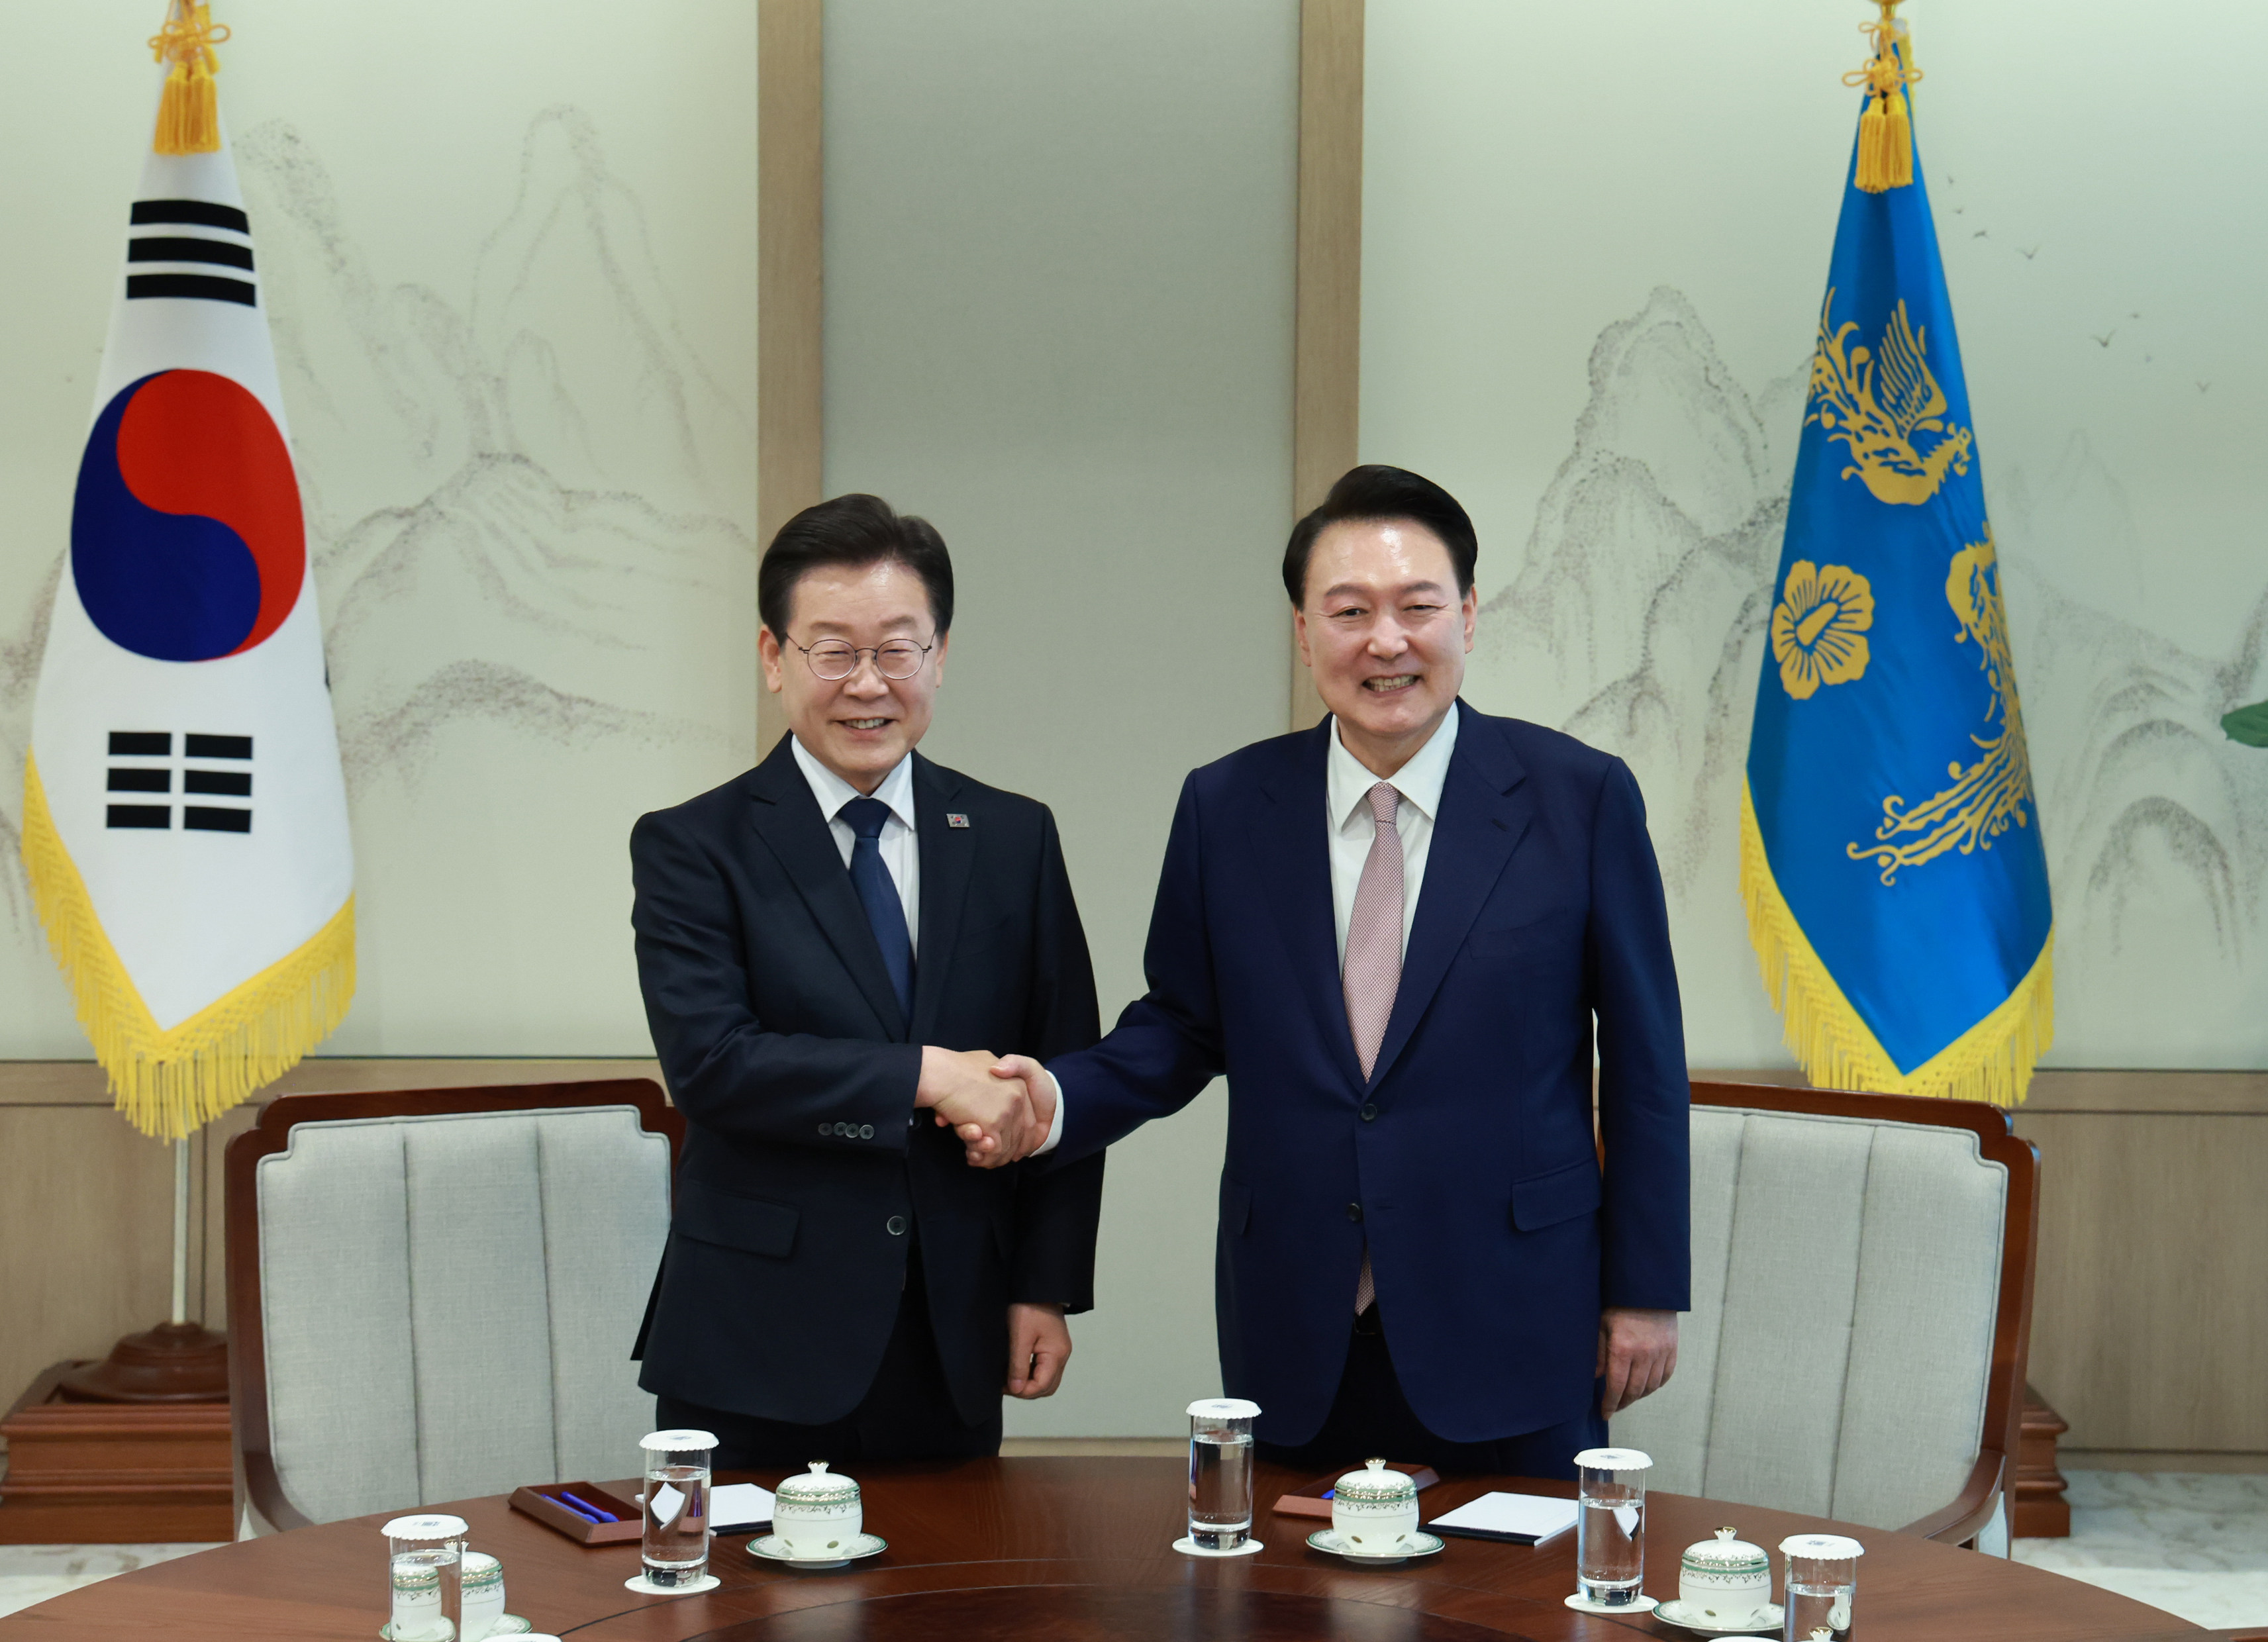 South Korean President Yoon Suk-yeol (right) poses for a photo with Lee Jae-myung, head of the main opposition Democratic Party, before their talks at the presidential office in Seoul on Monday. Photo: dpa